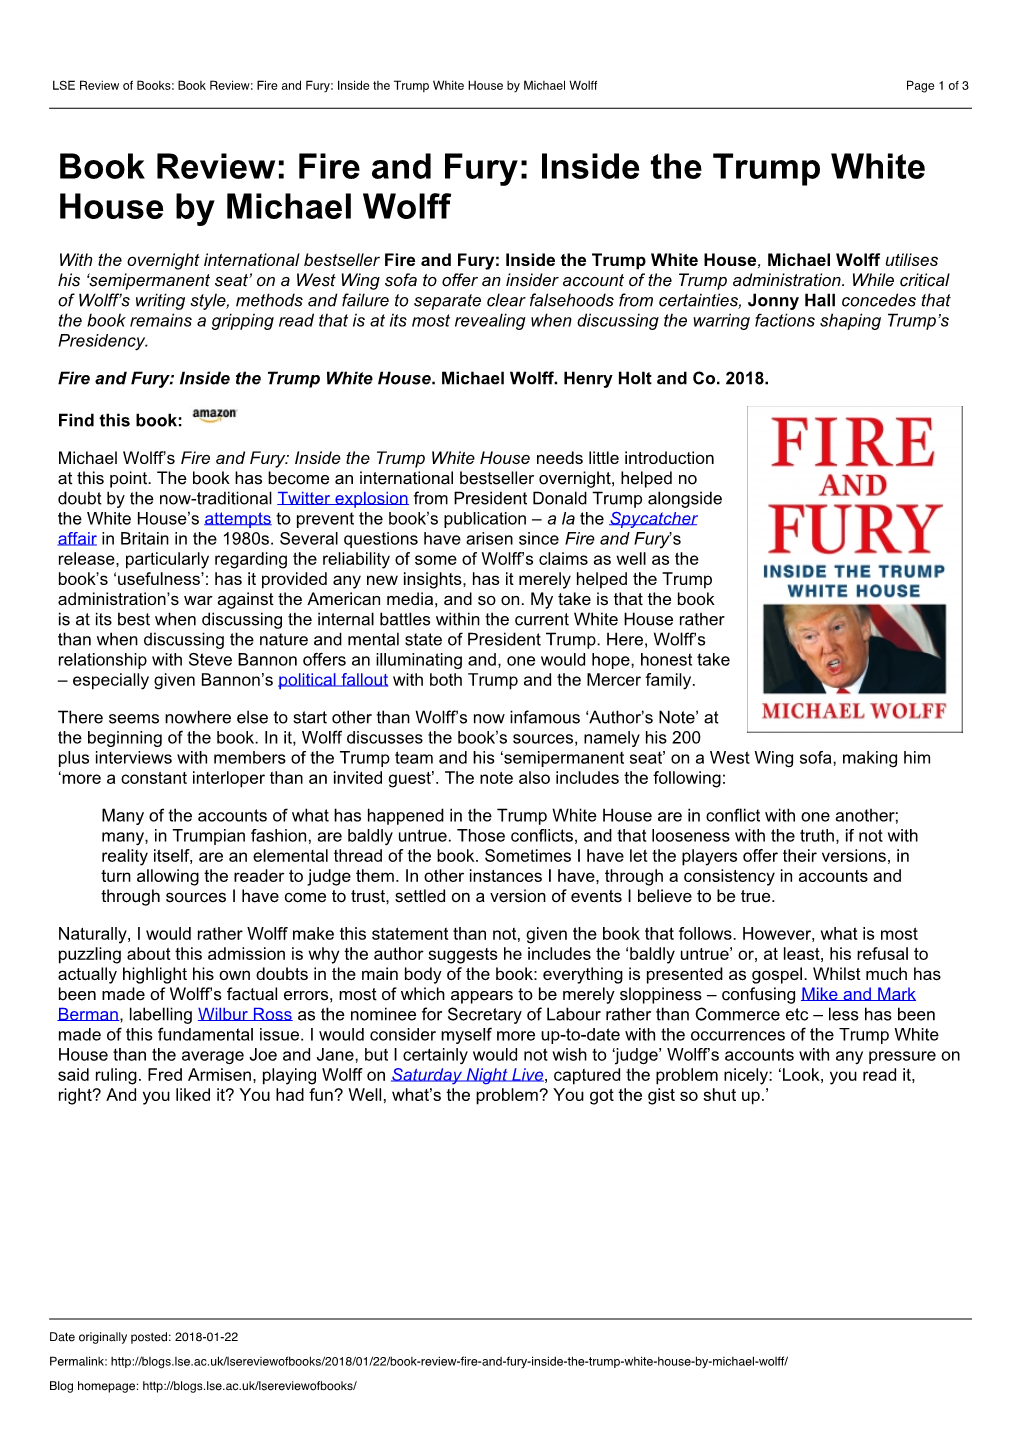 Book Review: Fire and Fury: Inside the Trump White House by Michael Wolff Page 1 of 3